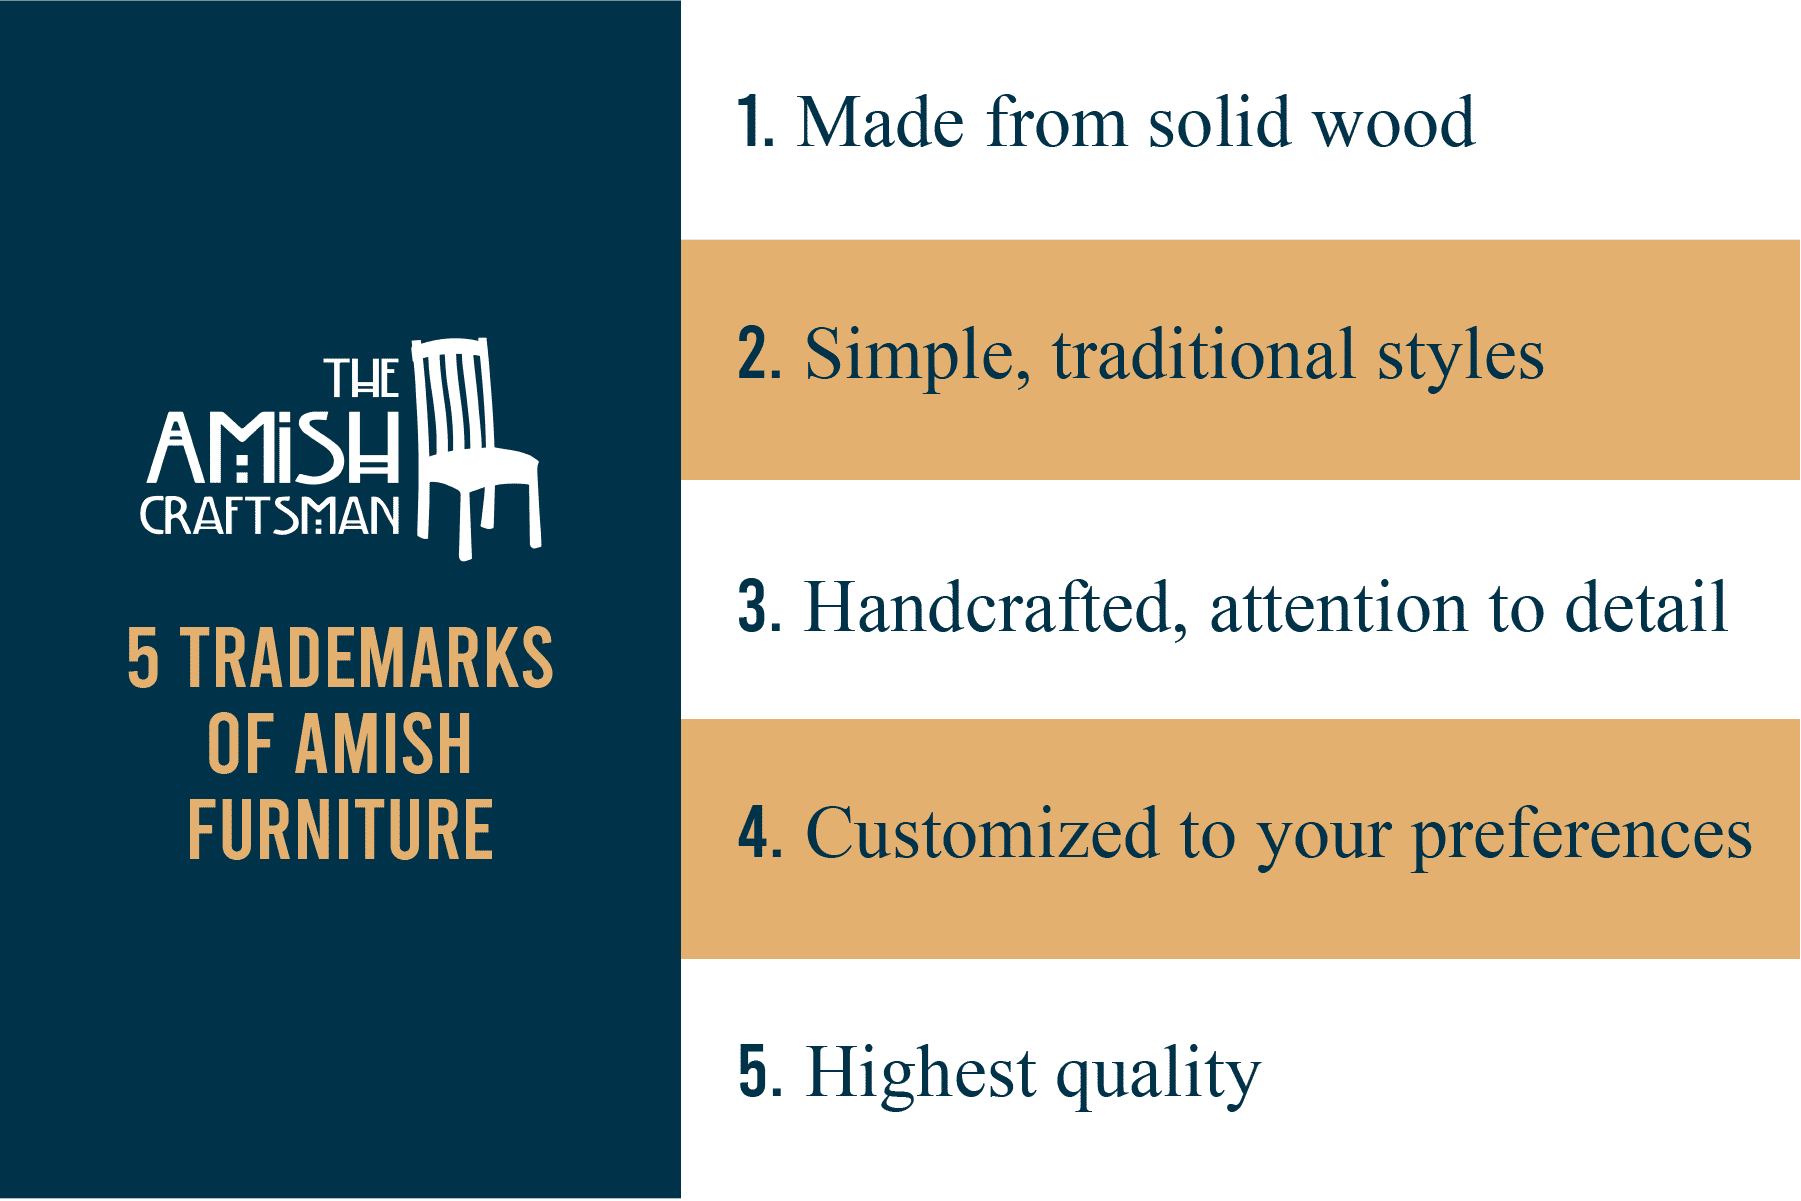 Trademarks of Amish furniture